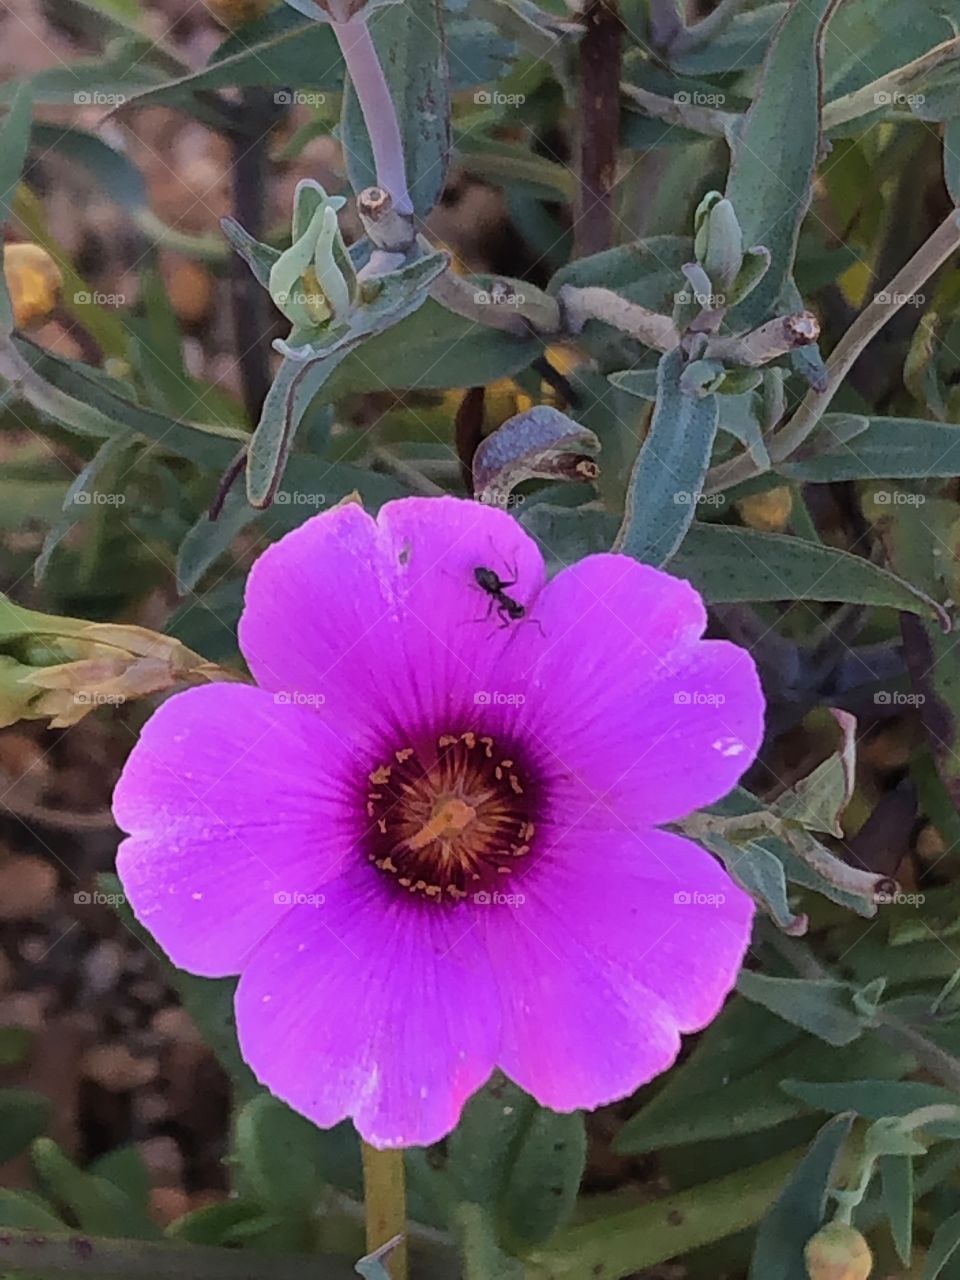 Wildflower with an ant, Western Australia 